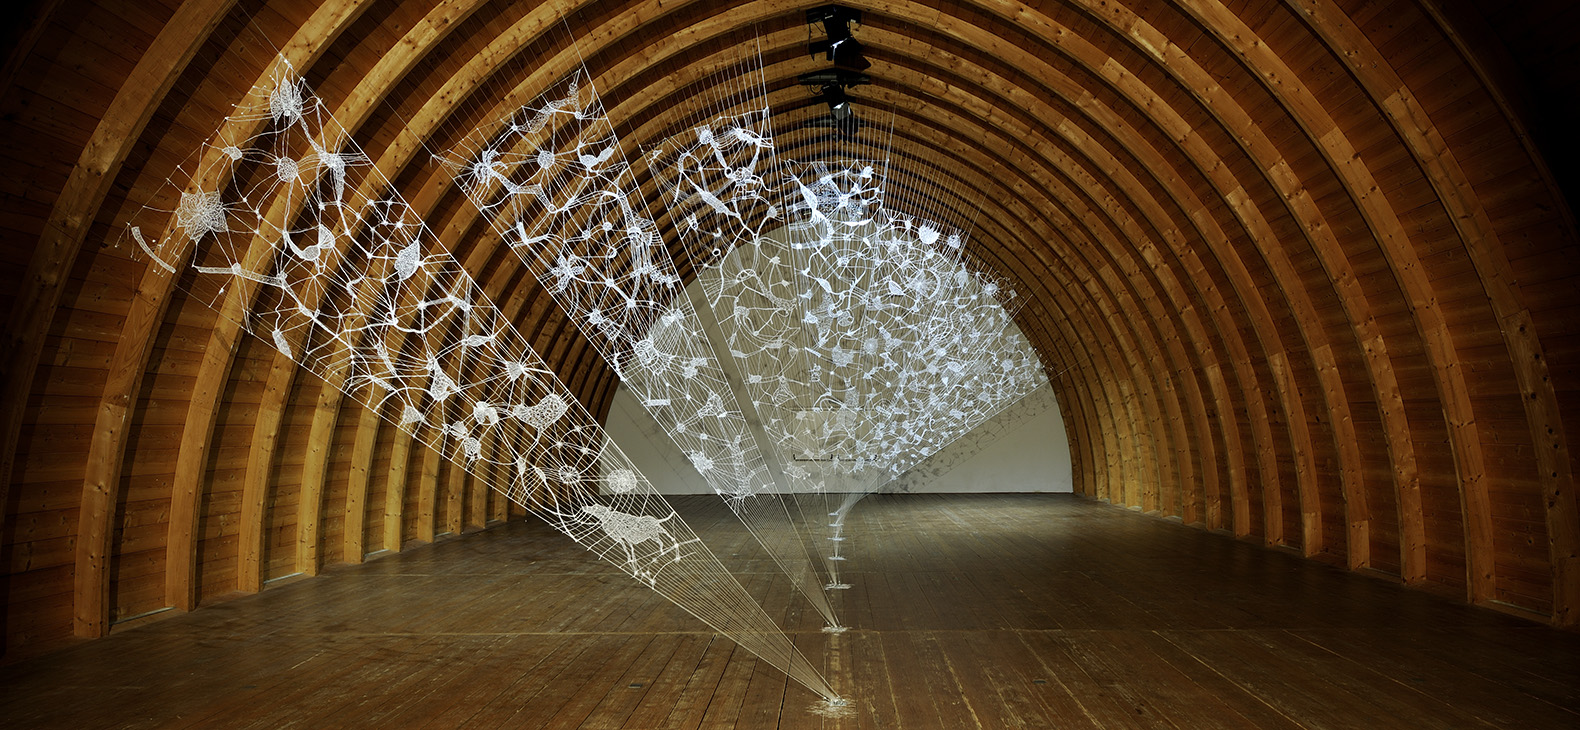 Total view of the installation by artist Zipora Rafaelov in the barrel vault of the Schafhof - European center for art of the district of Upper Bavaria. Delicate, fan-shaped installation made of 3D filament in wooden barrel vault. White motifs on seven panels stretched from the floor to the vault of the ceiling. Artist: Zipora Rafaelov; Photo: Klaus Zipa